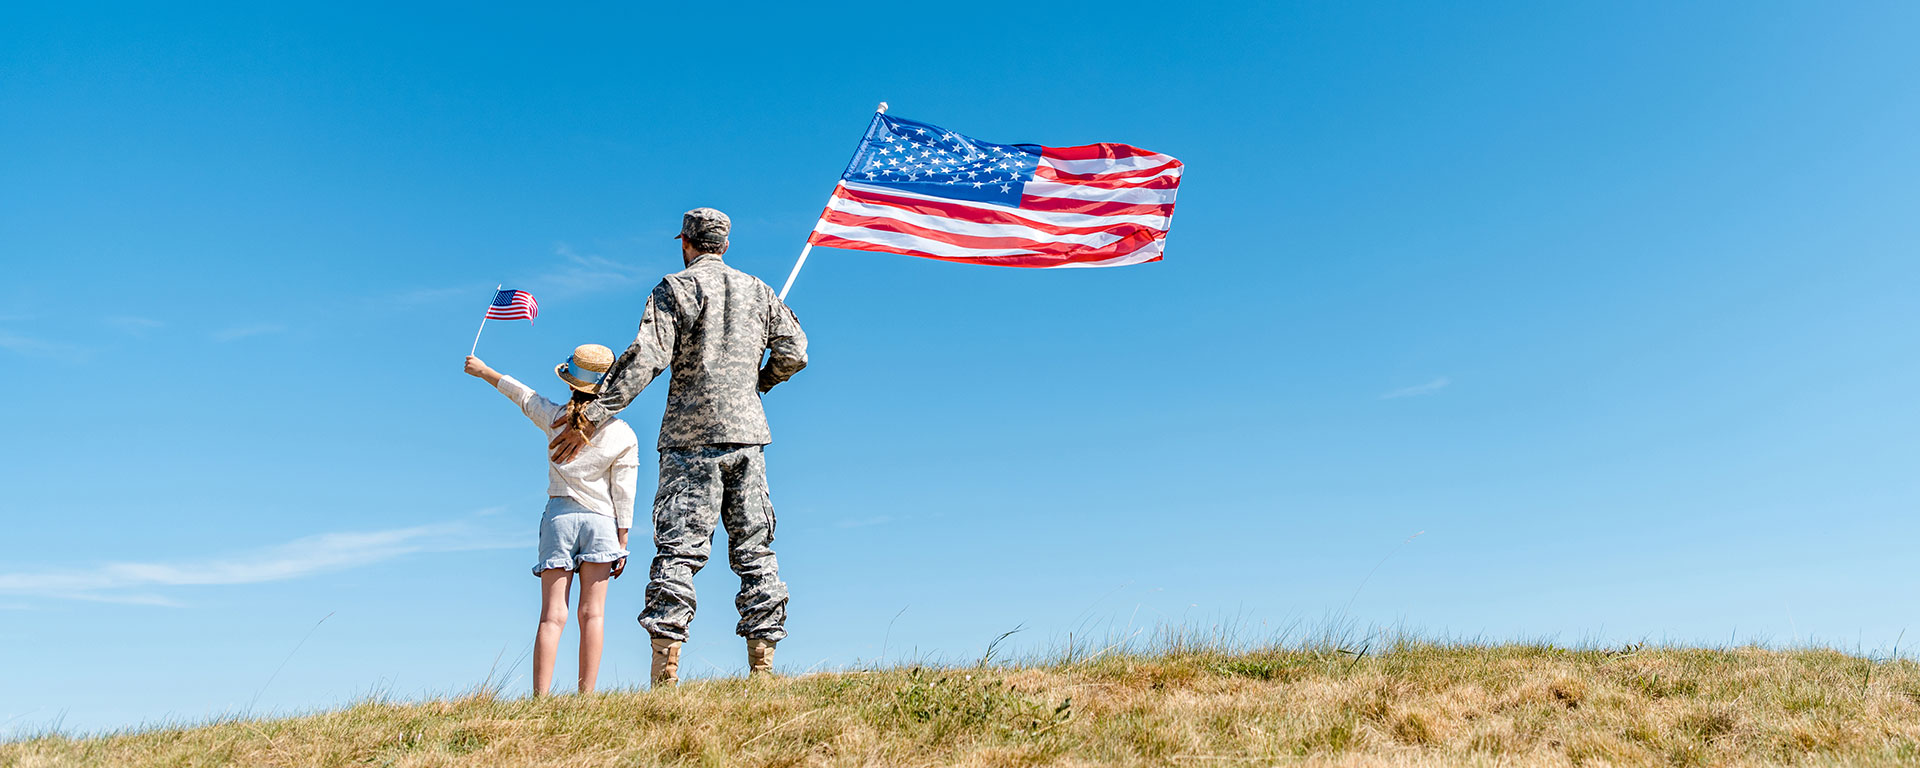 Uniformed military member stands with daughter on a grassy hill, with US flags waving in the wind.